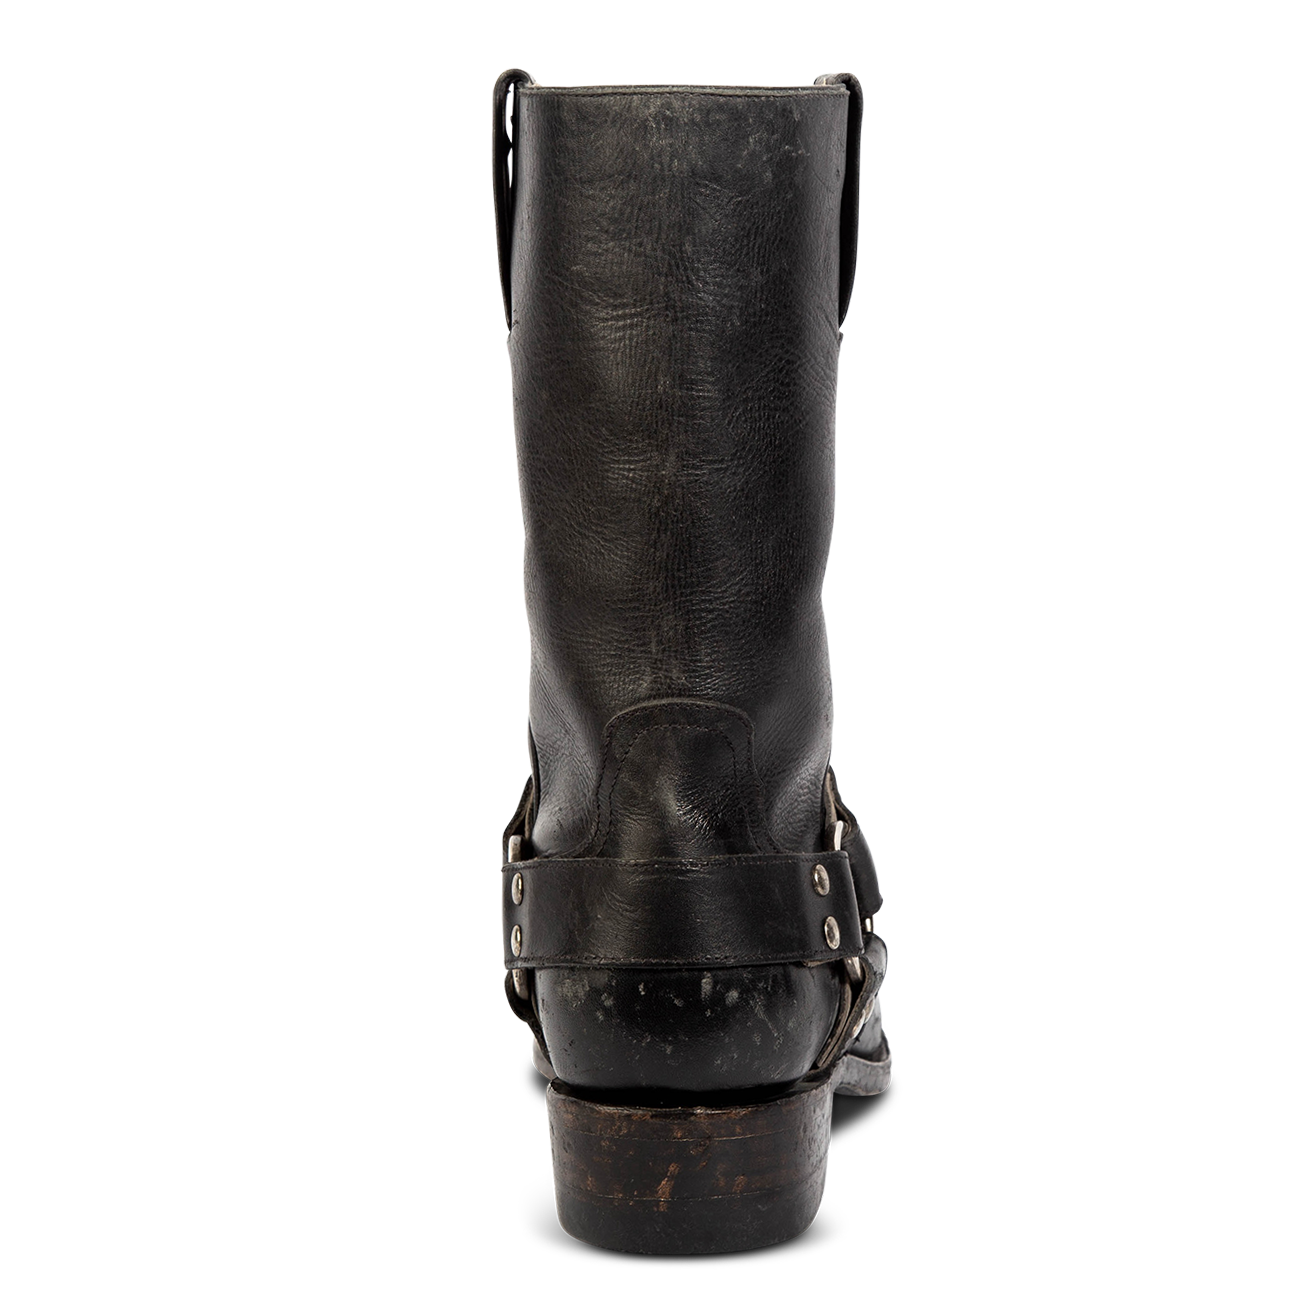 Back view showing distressed heel and leather ankle harness on FREEBIRD men's Copperhead black boot